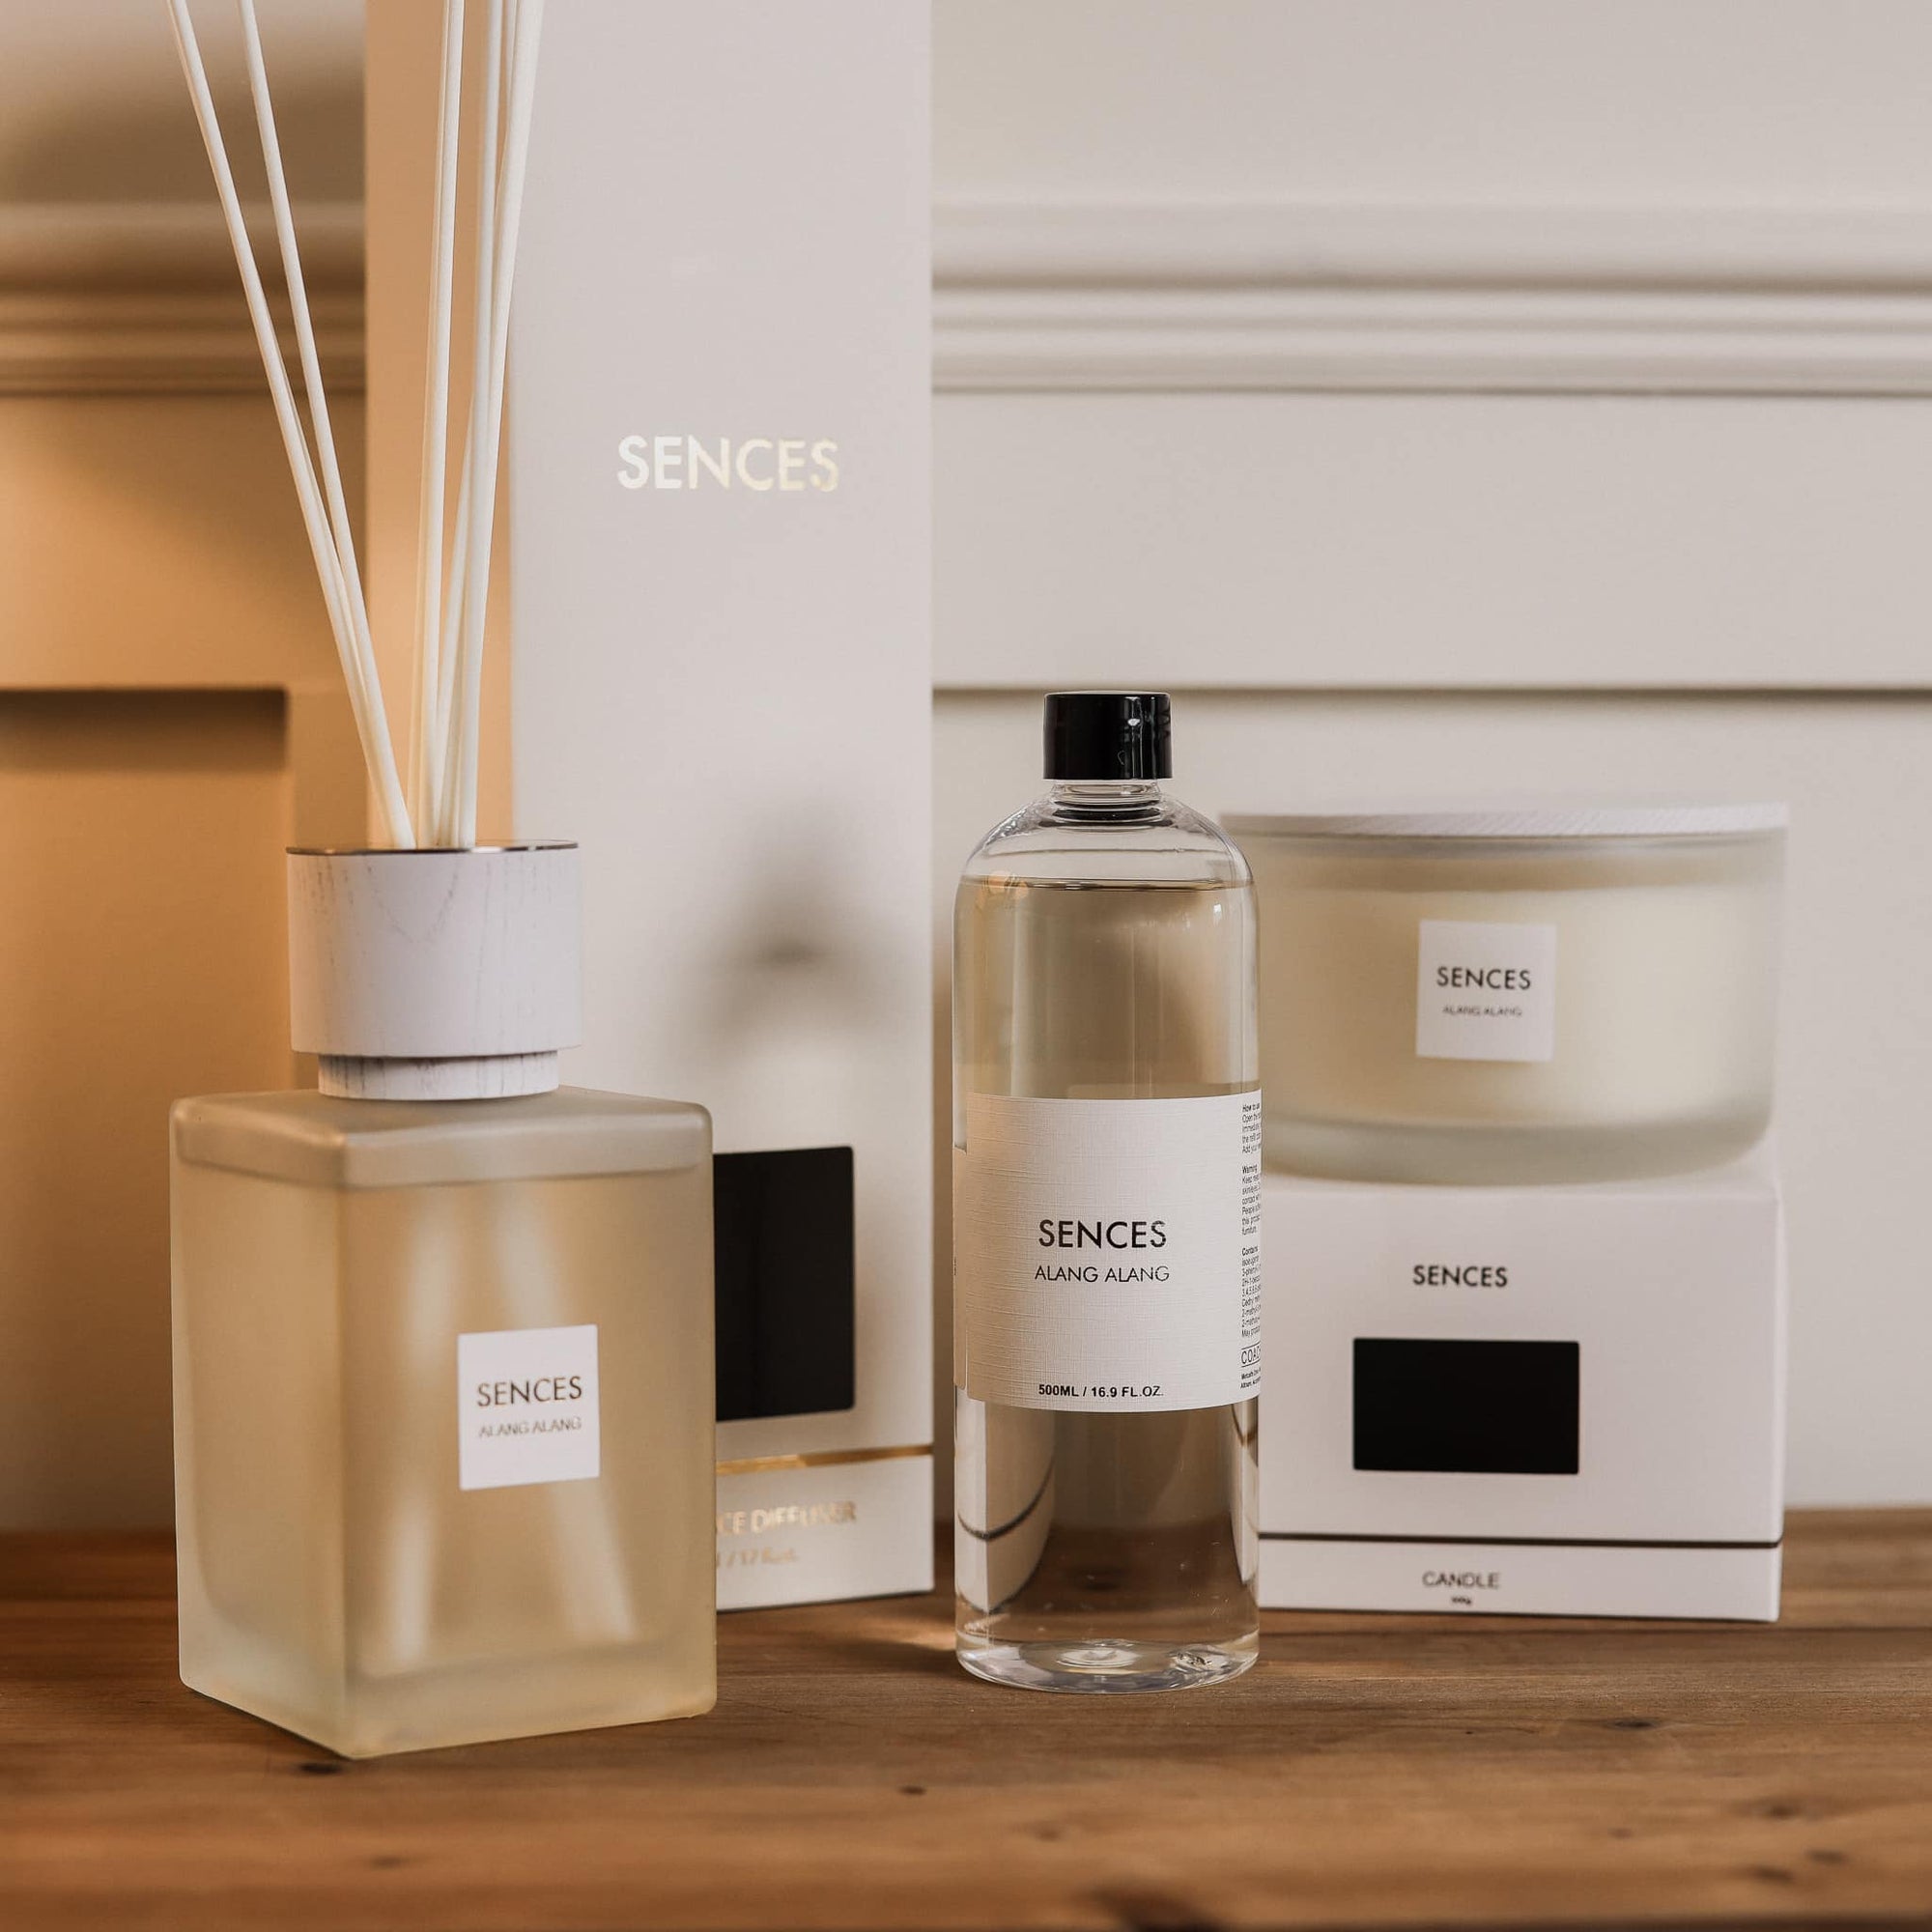 Sences Alang Alang White collection on wooden console, including diffuser, candle and refill scent.